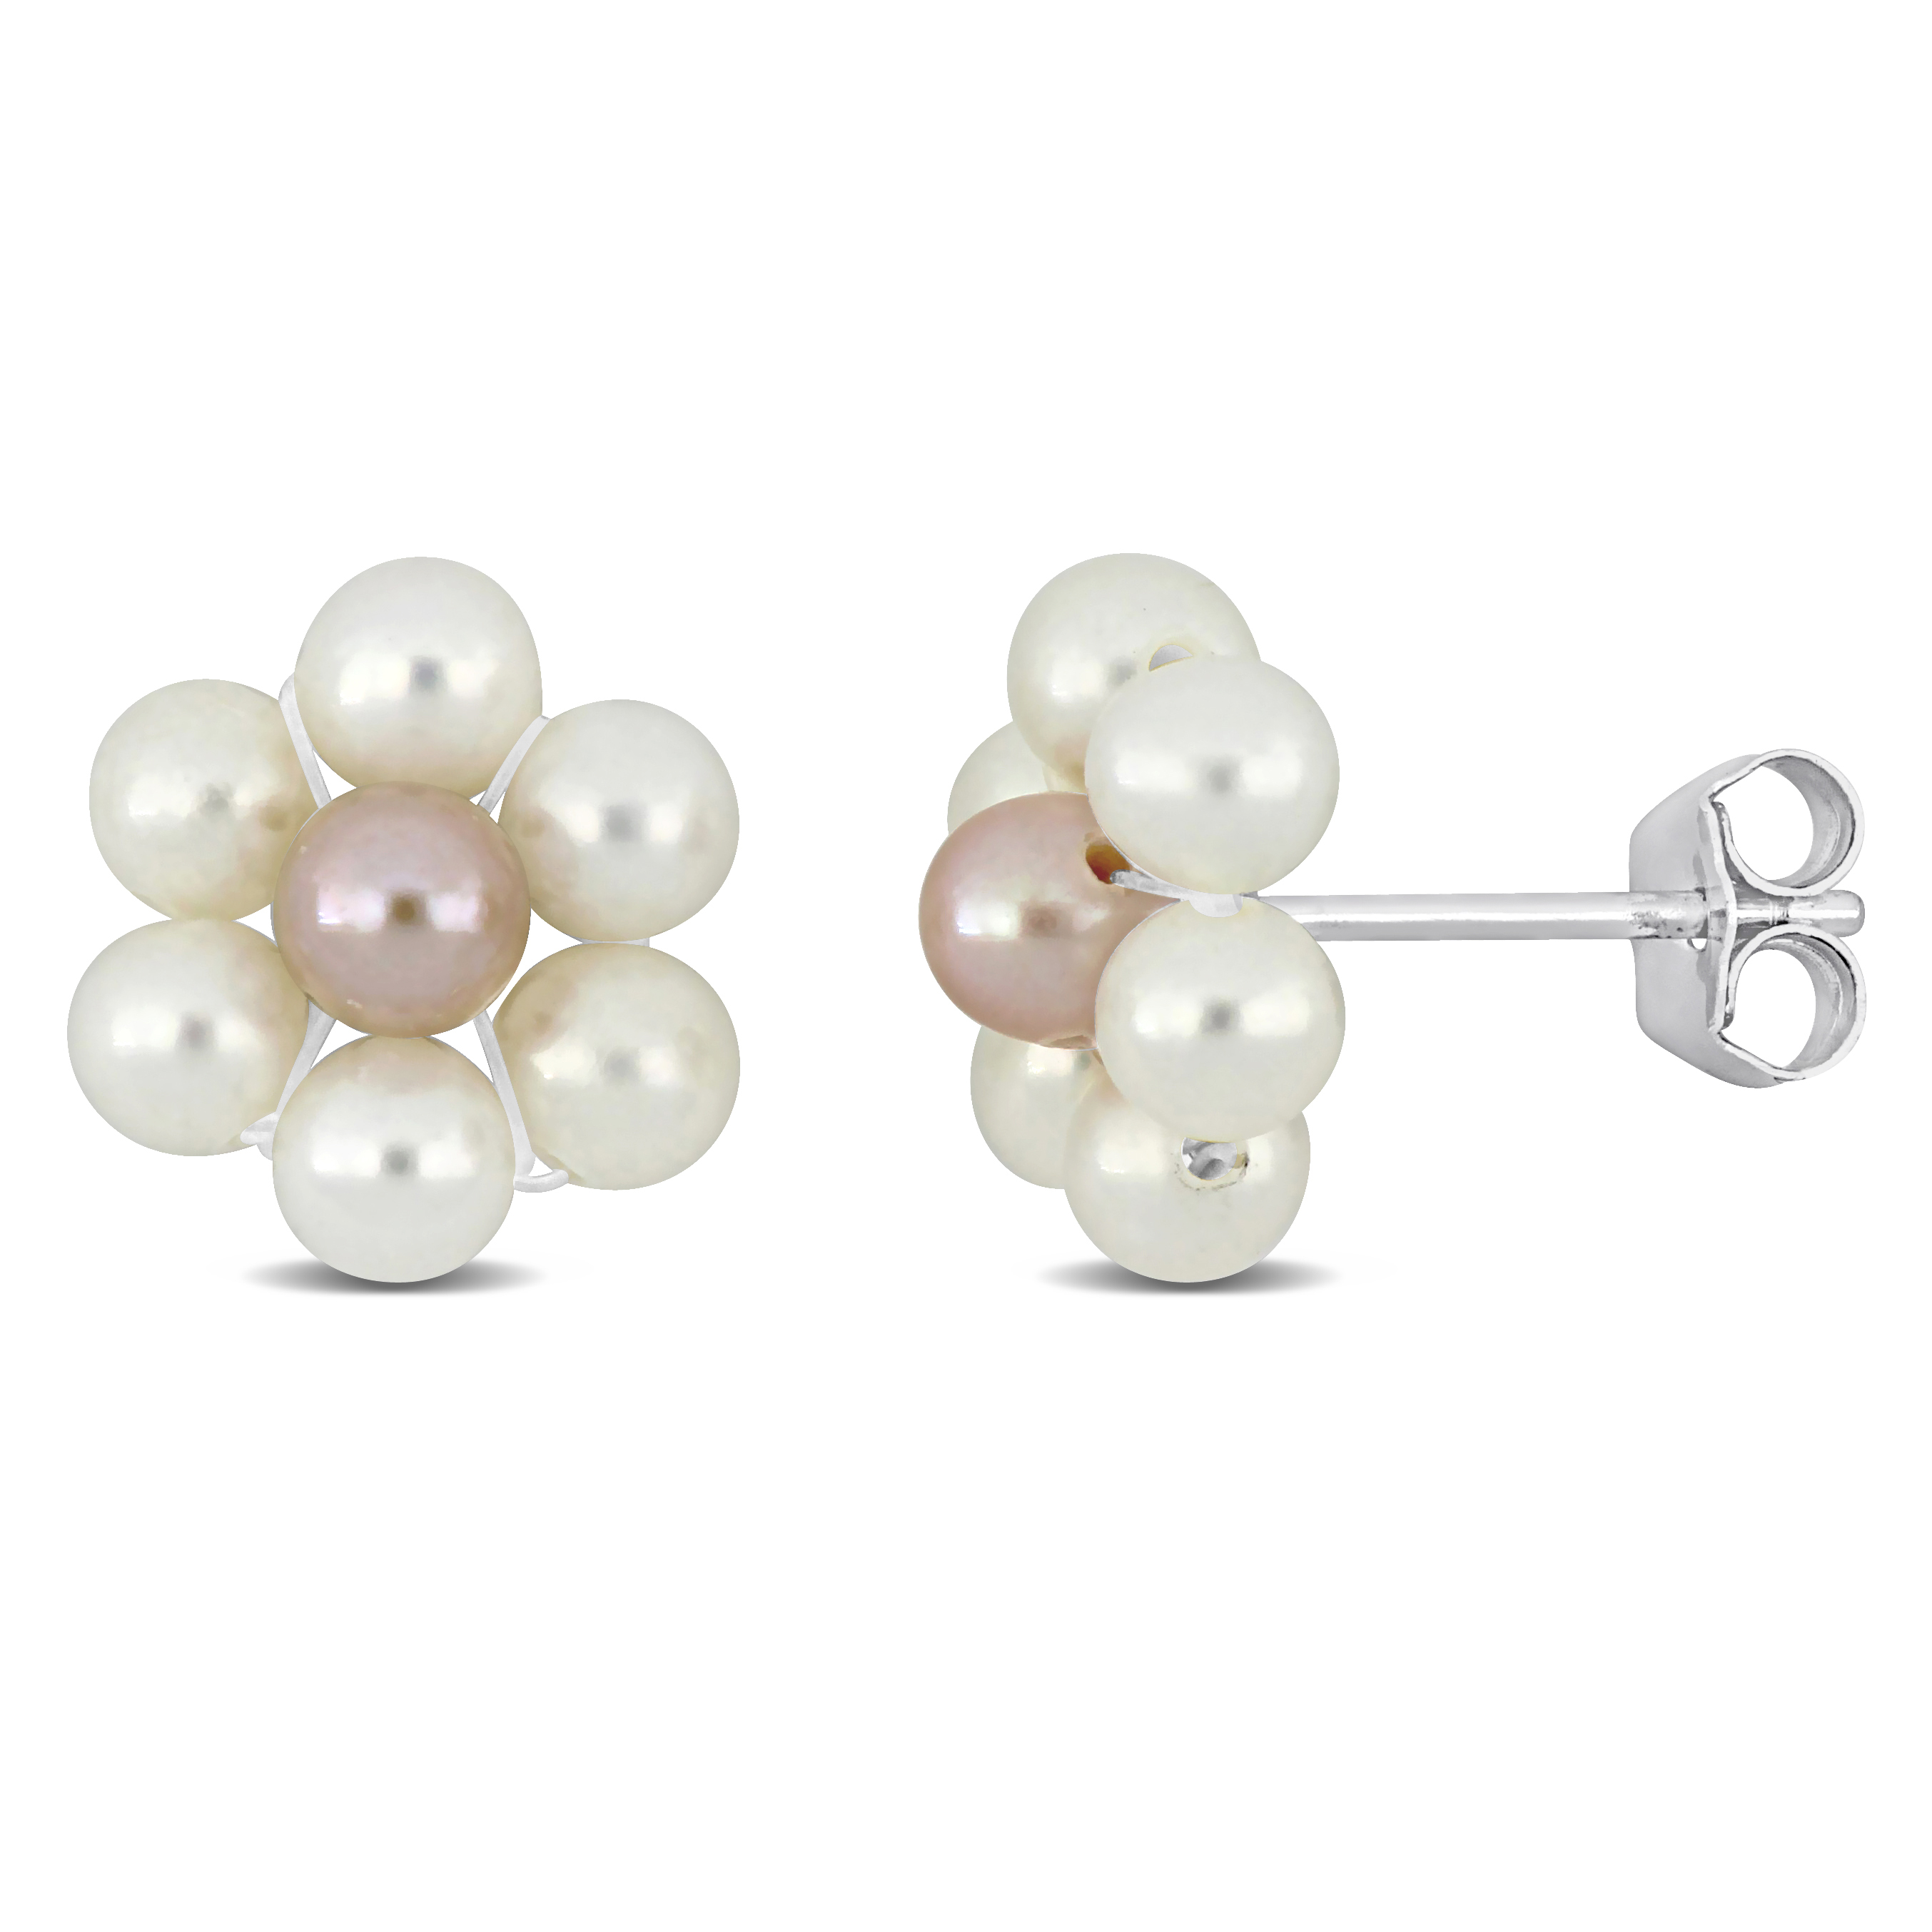 White and Pink Flower Design Cultured Freshwater Pearl Stud Earrings Sterling Silver